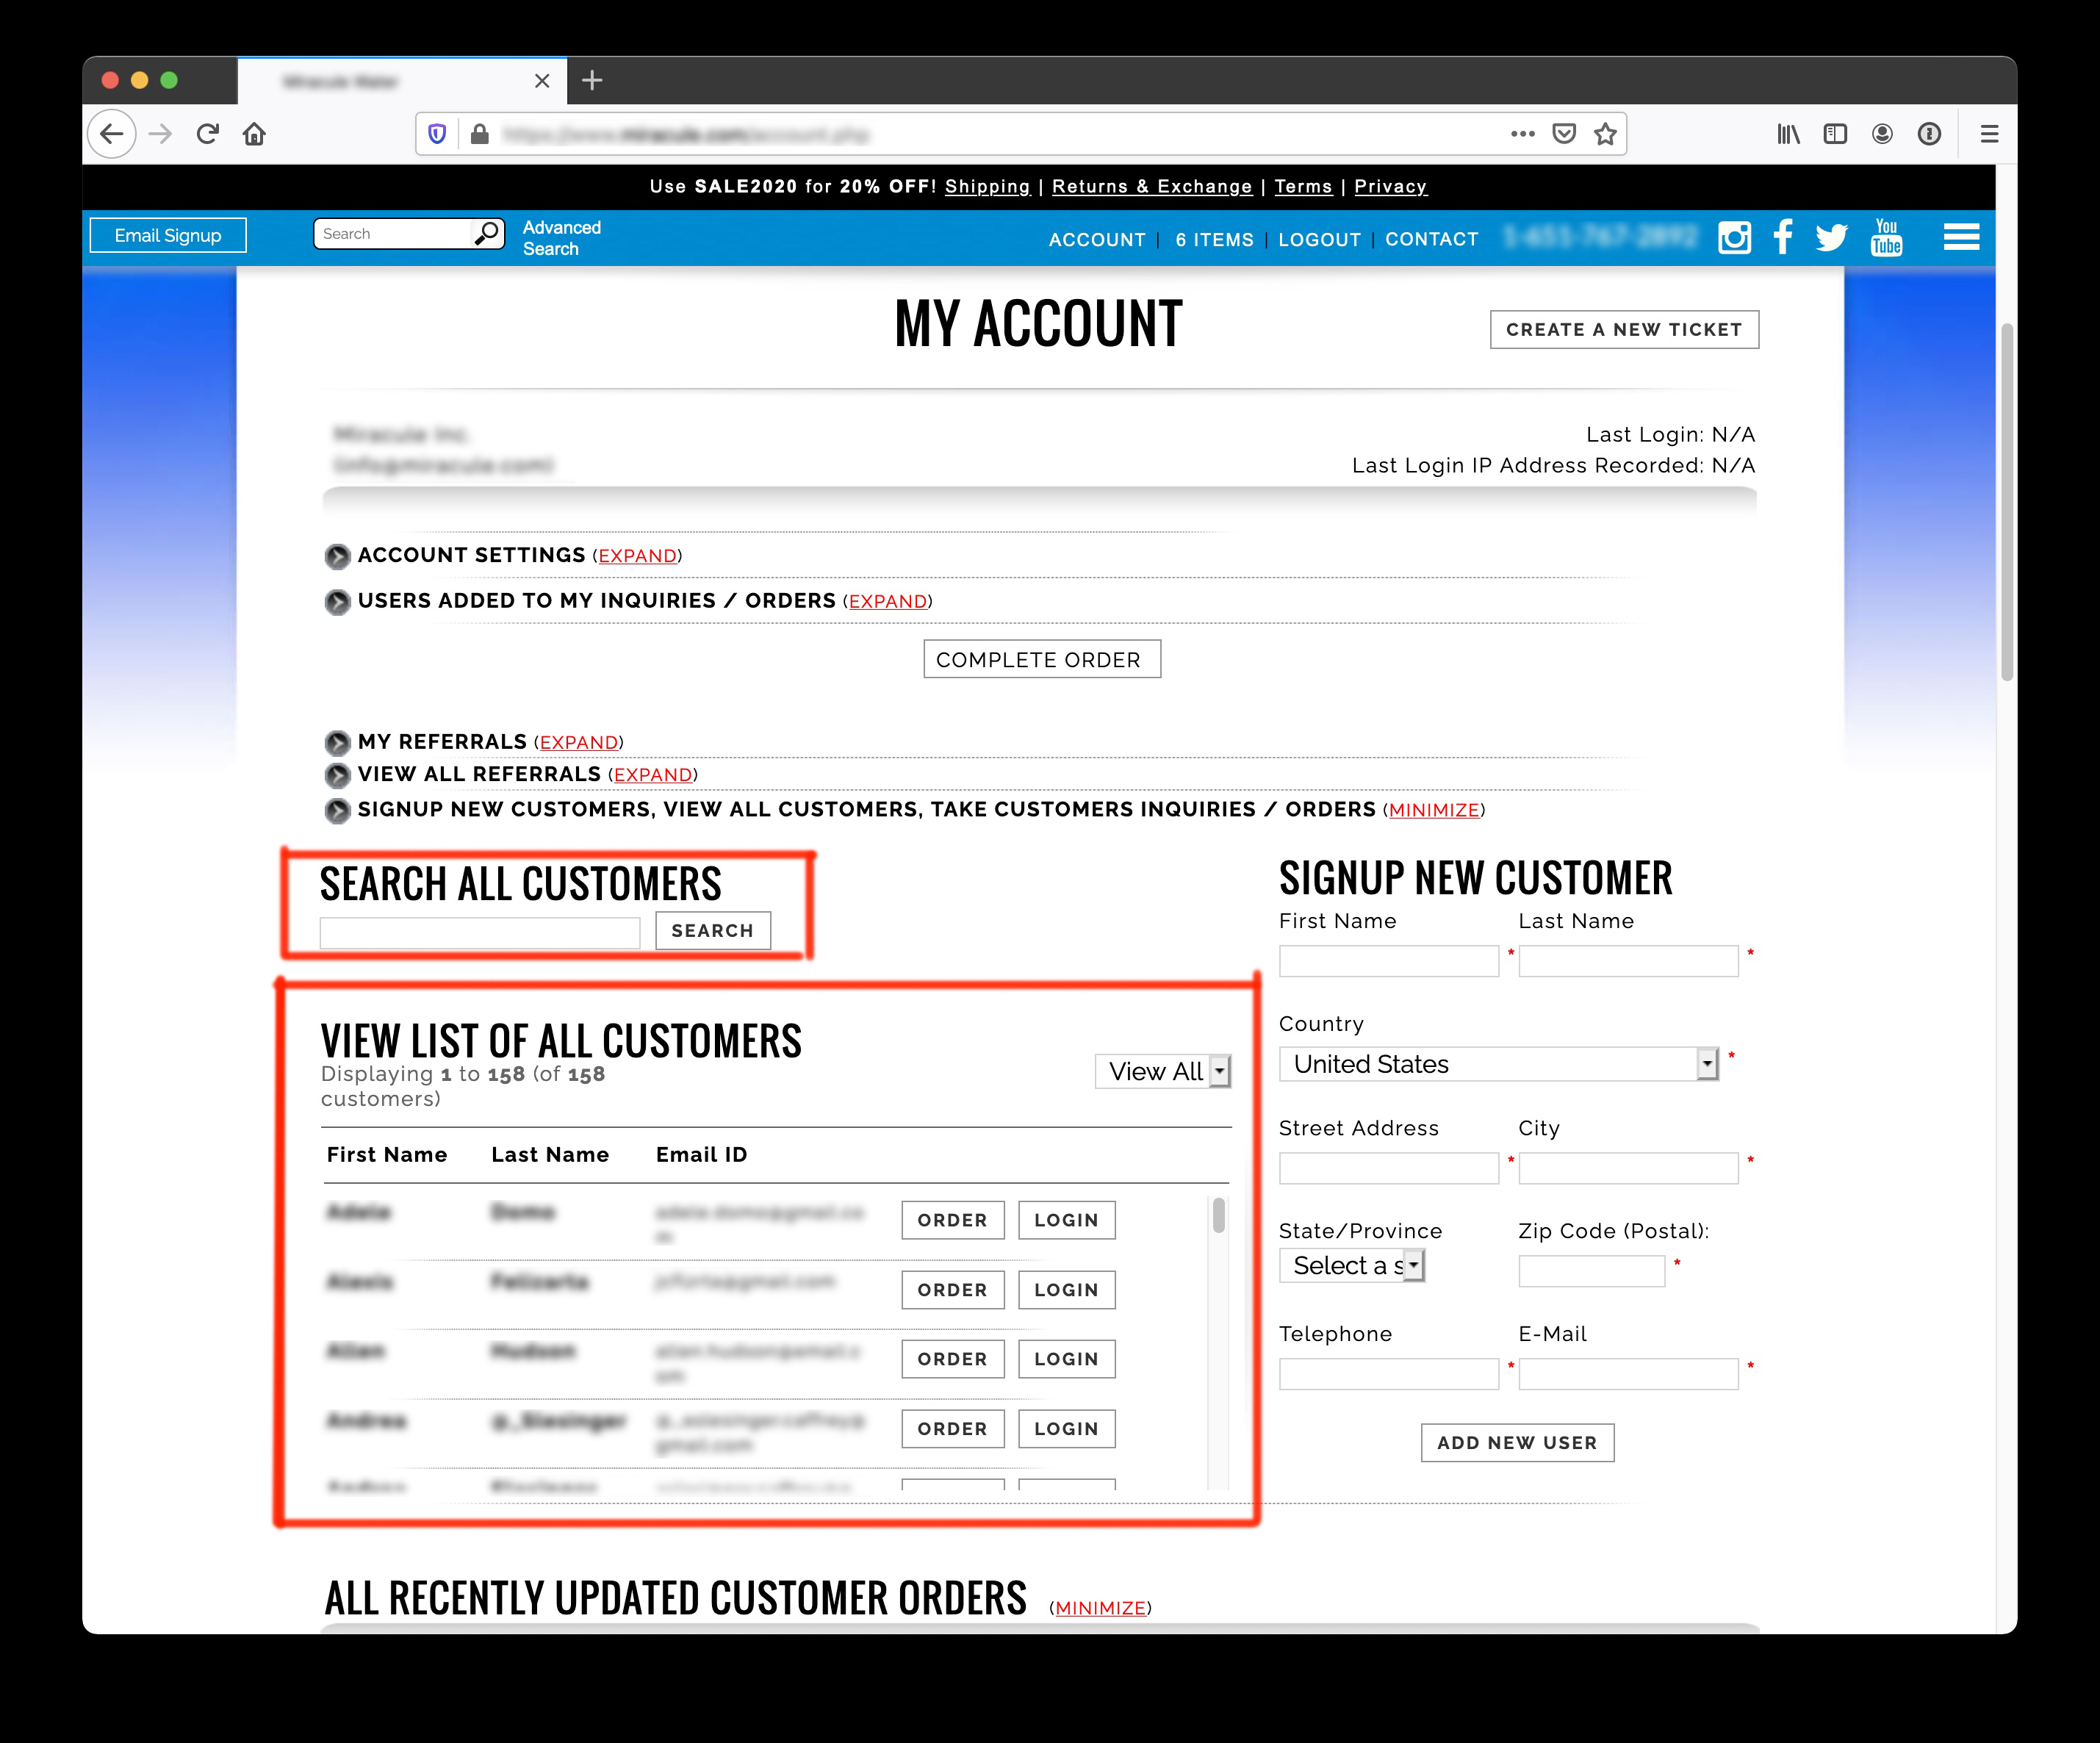 Search for EXISTING CUSTOMER Account